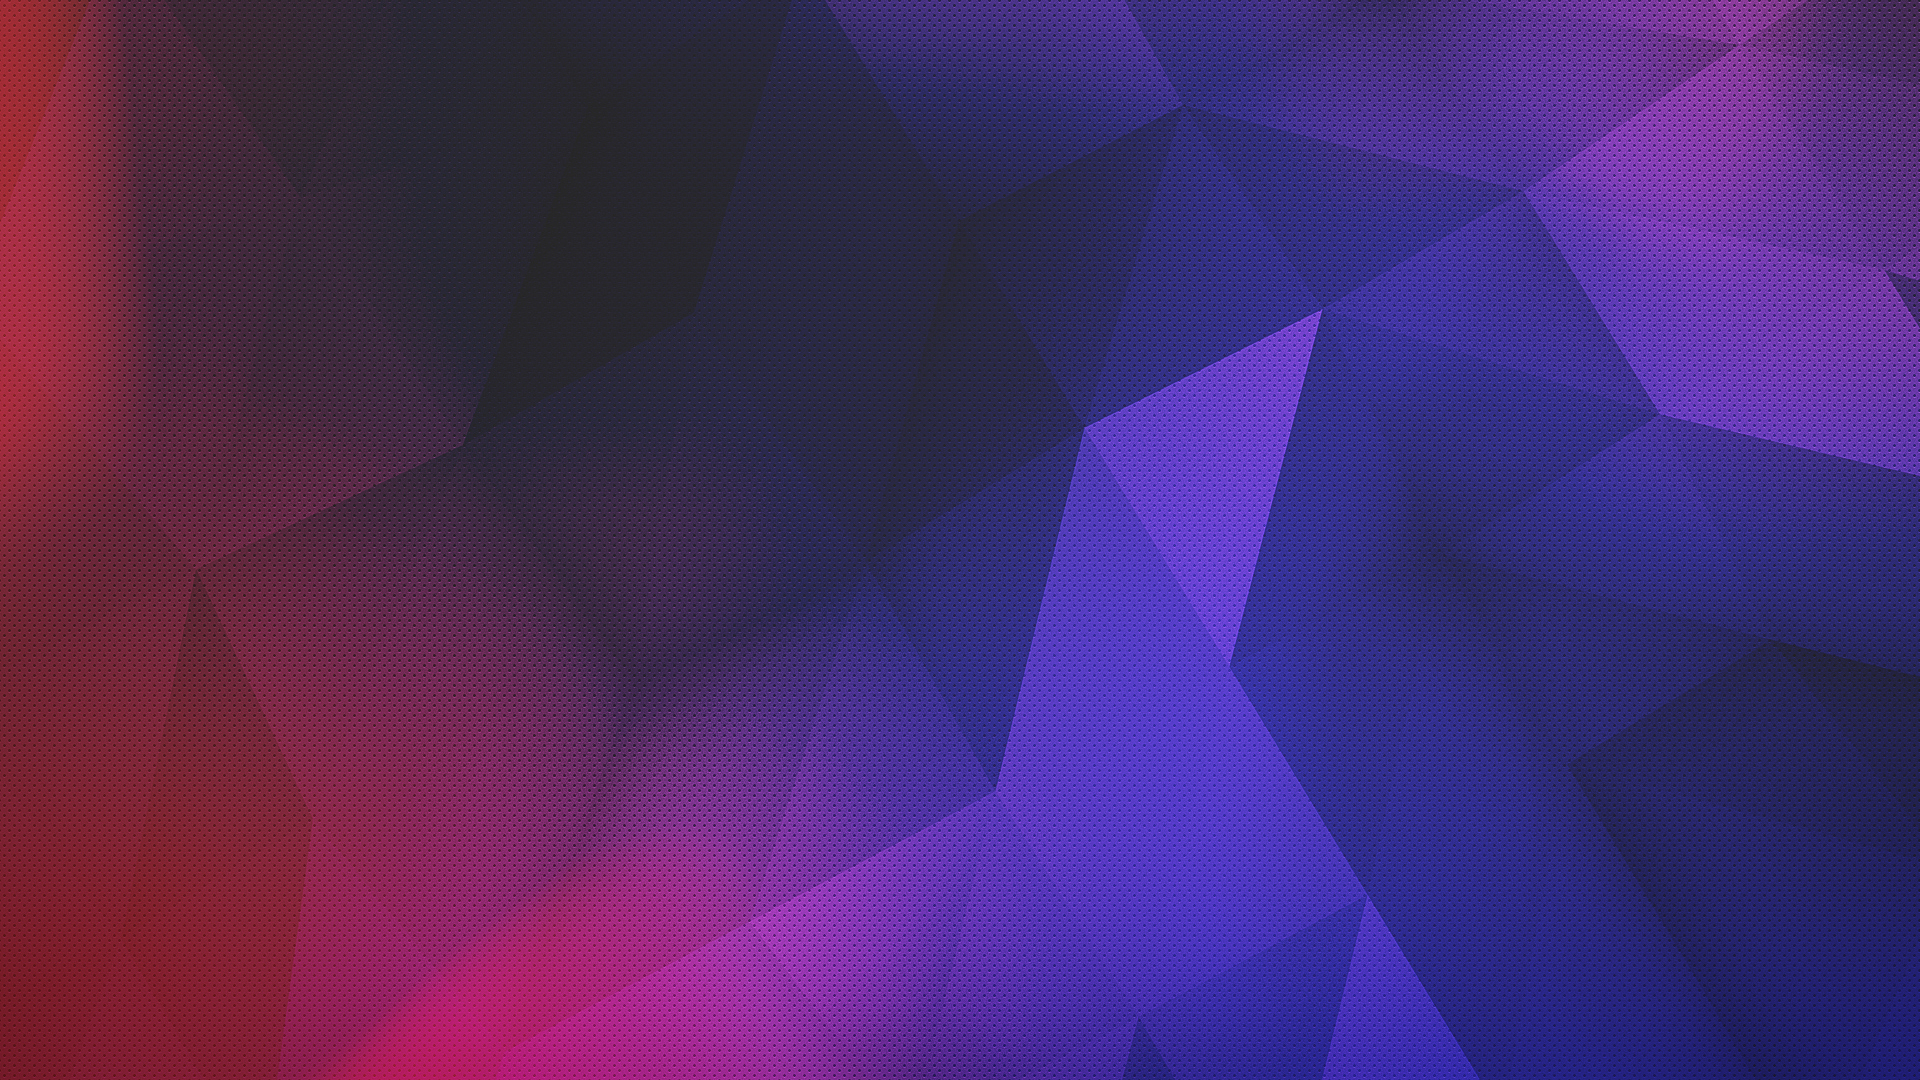 Low Poly Blue Wallpapers